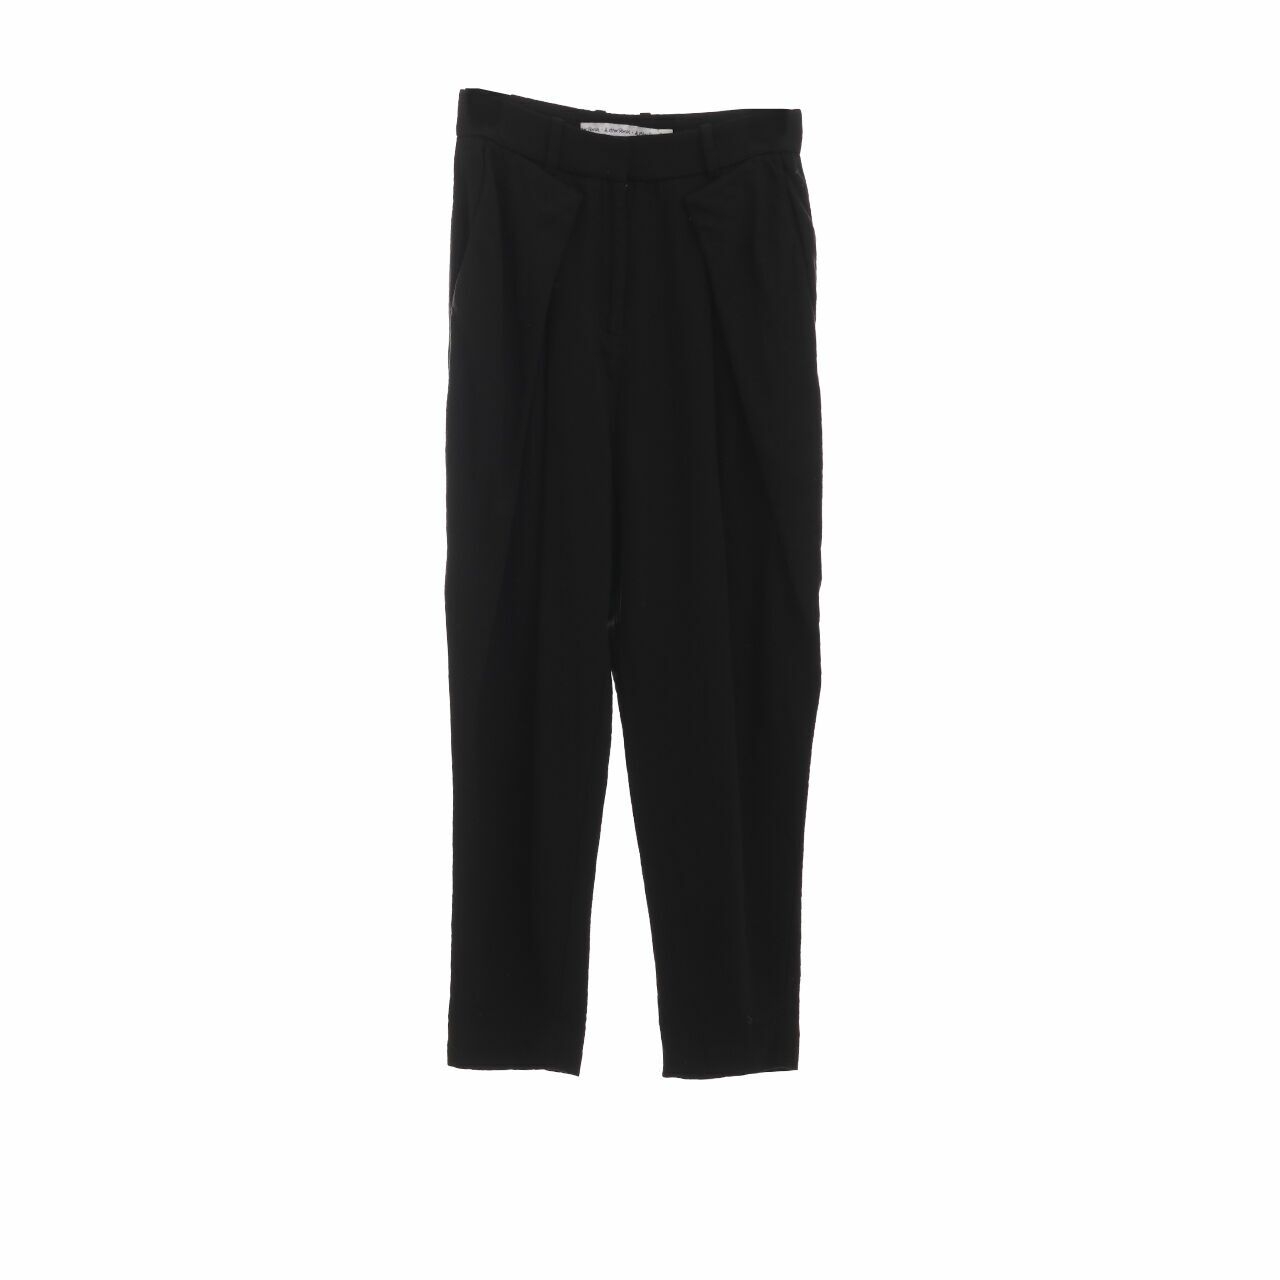 & Other Stories Black Long Pants